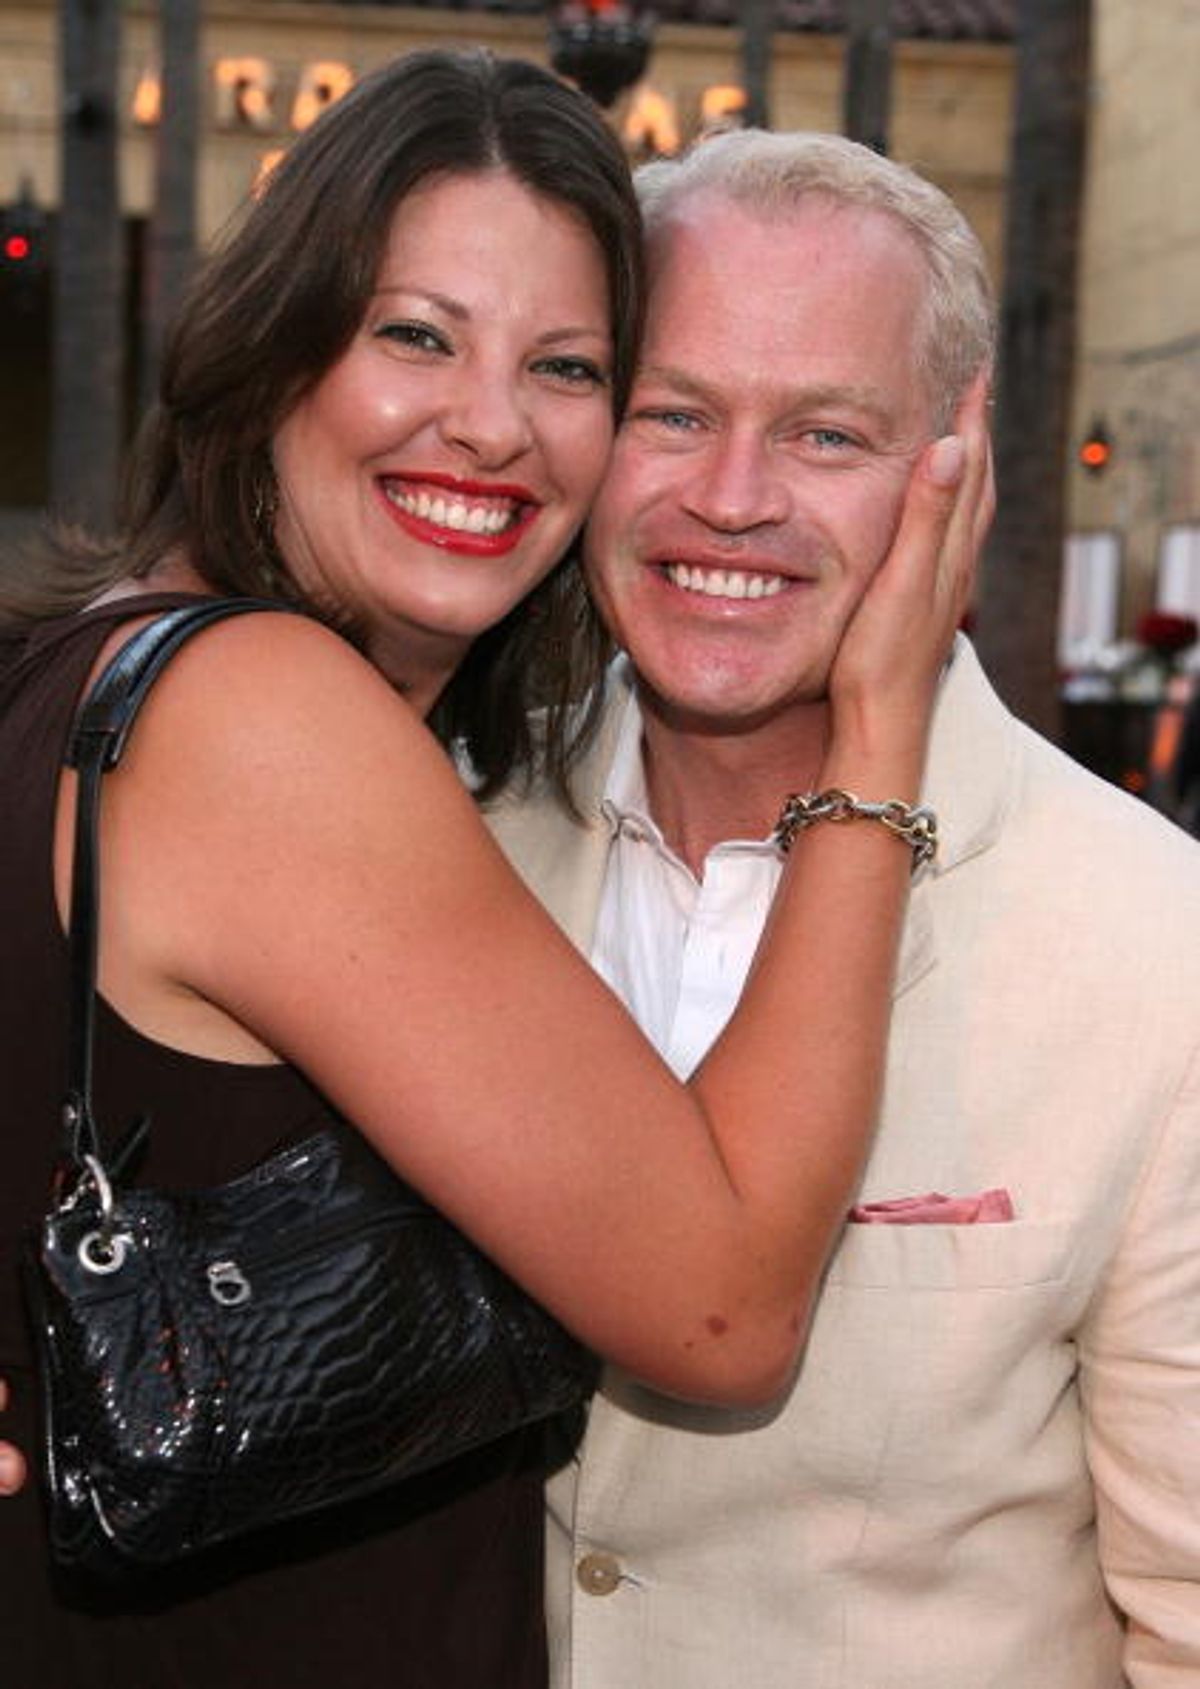 LOS ANGELES, CA - AUGUST 18:  Actor Neal McDonough (r) and wife Ruve Robertson arrive at the premiere of Overture Films' "Traitor" held at the Egyptian Theatre on August 18, 2008 in Los Angeles, California.  (Photo by Frazer Harrison/Getty Images for Overture)  (Frazer Harrison)